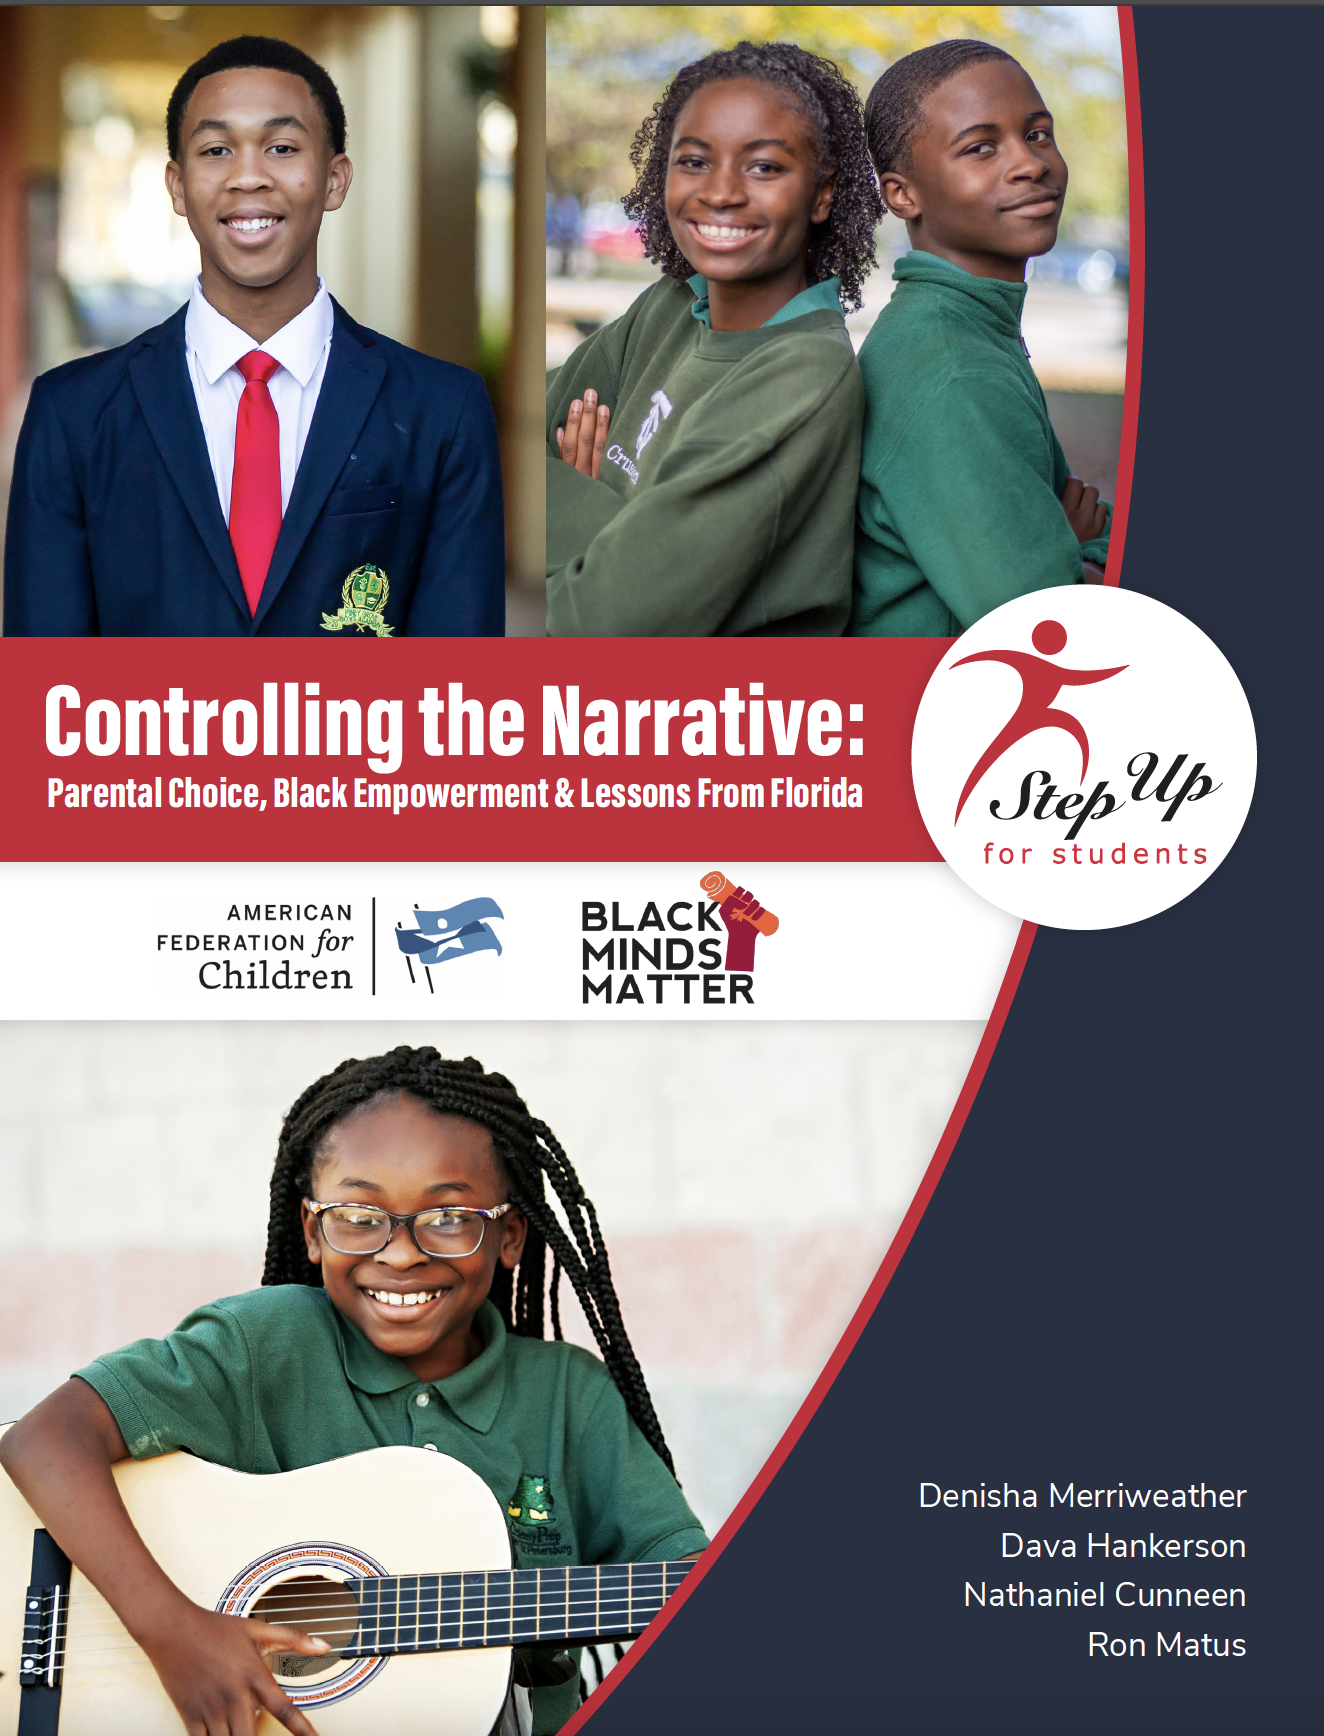 Controlling the narrative: Parental choice, Black empowerment and lessons from Florida